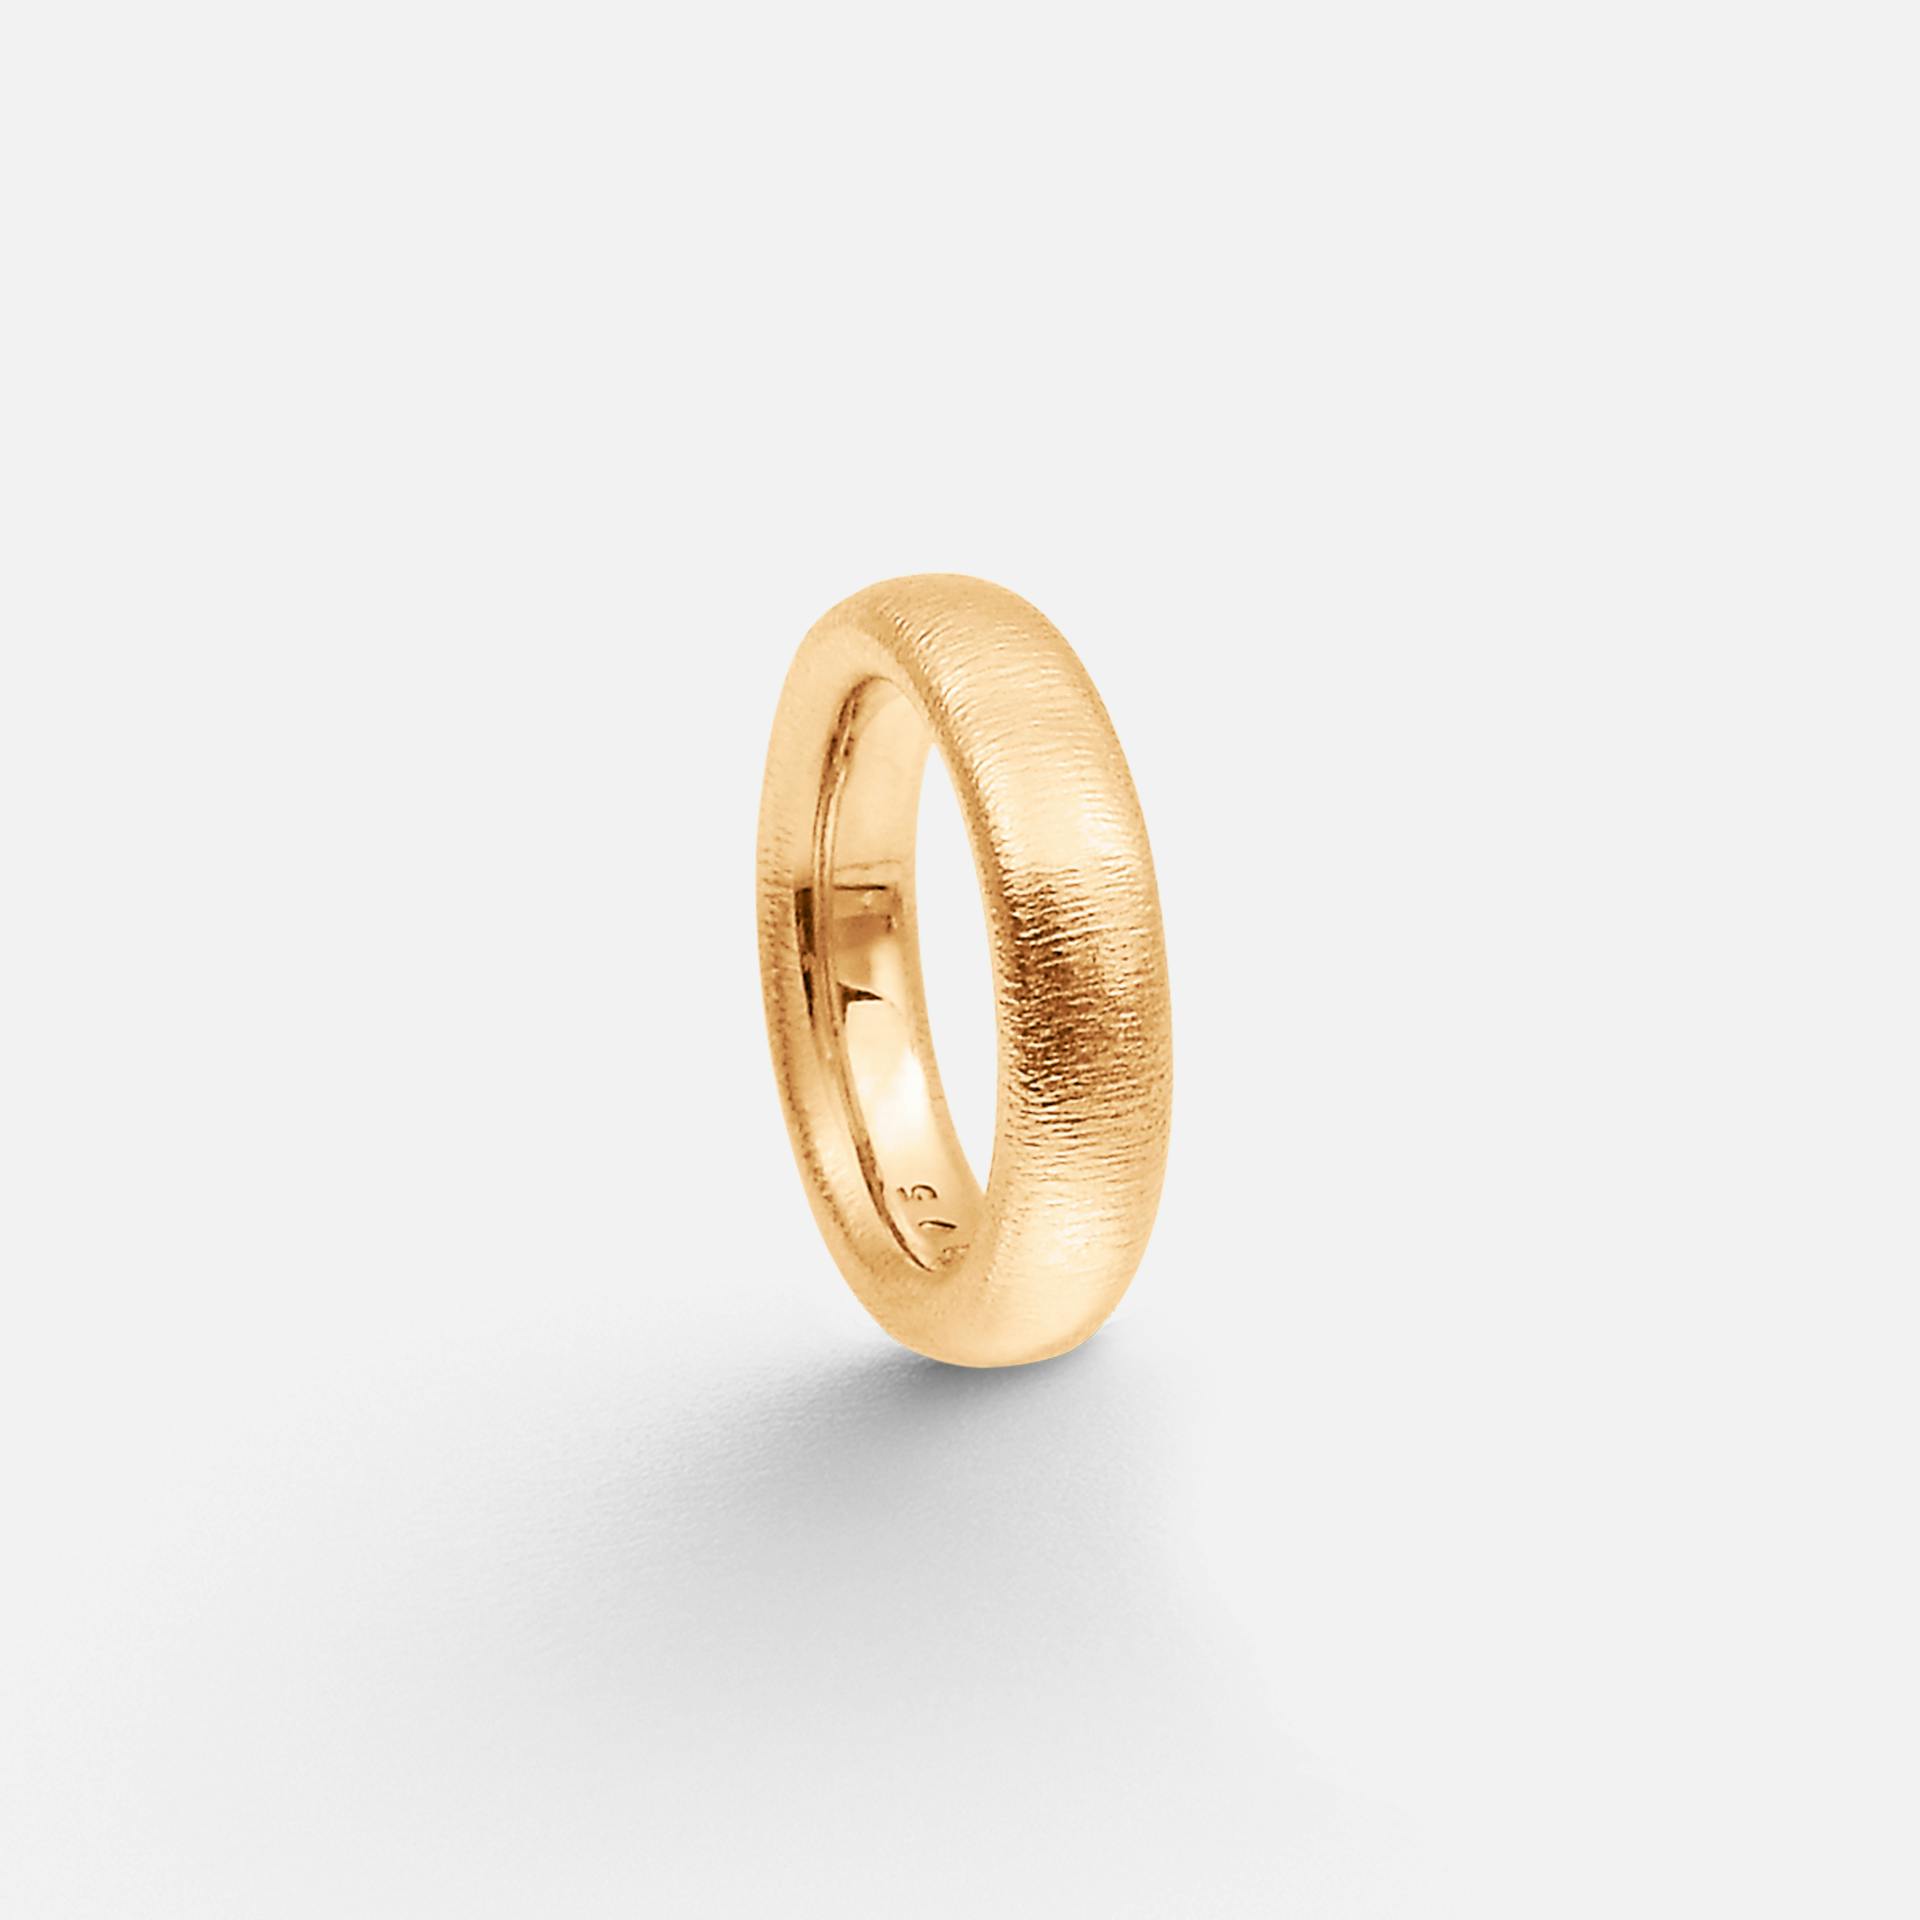 The Ring mens 5 mm 18k textured gold